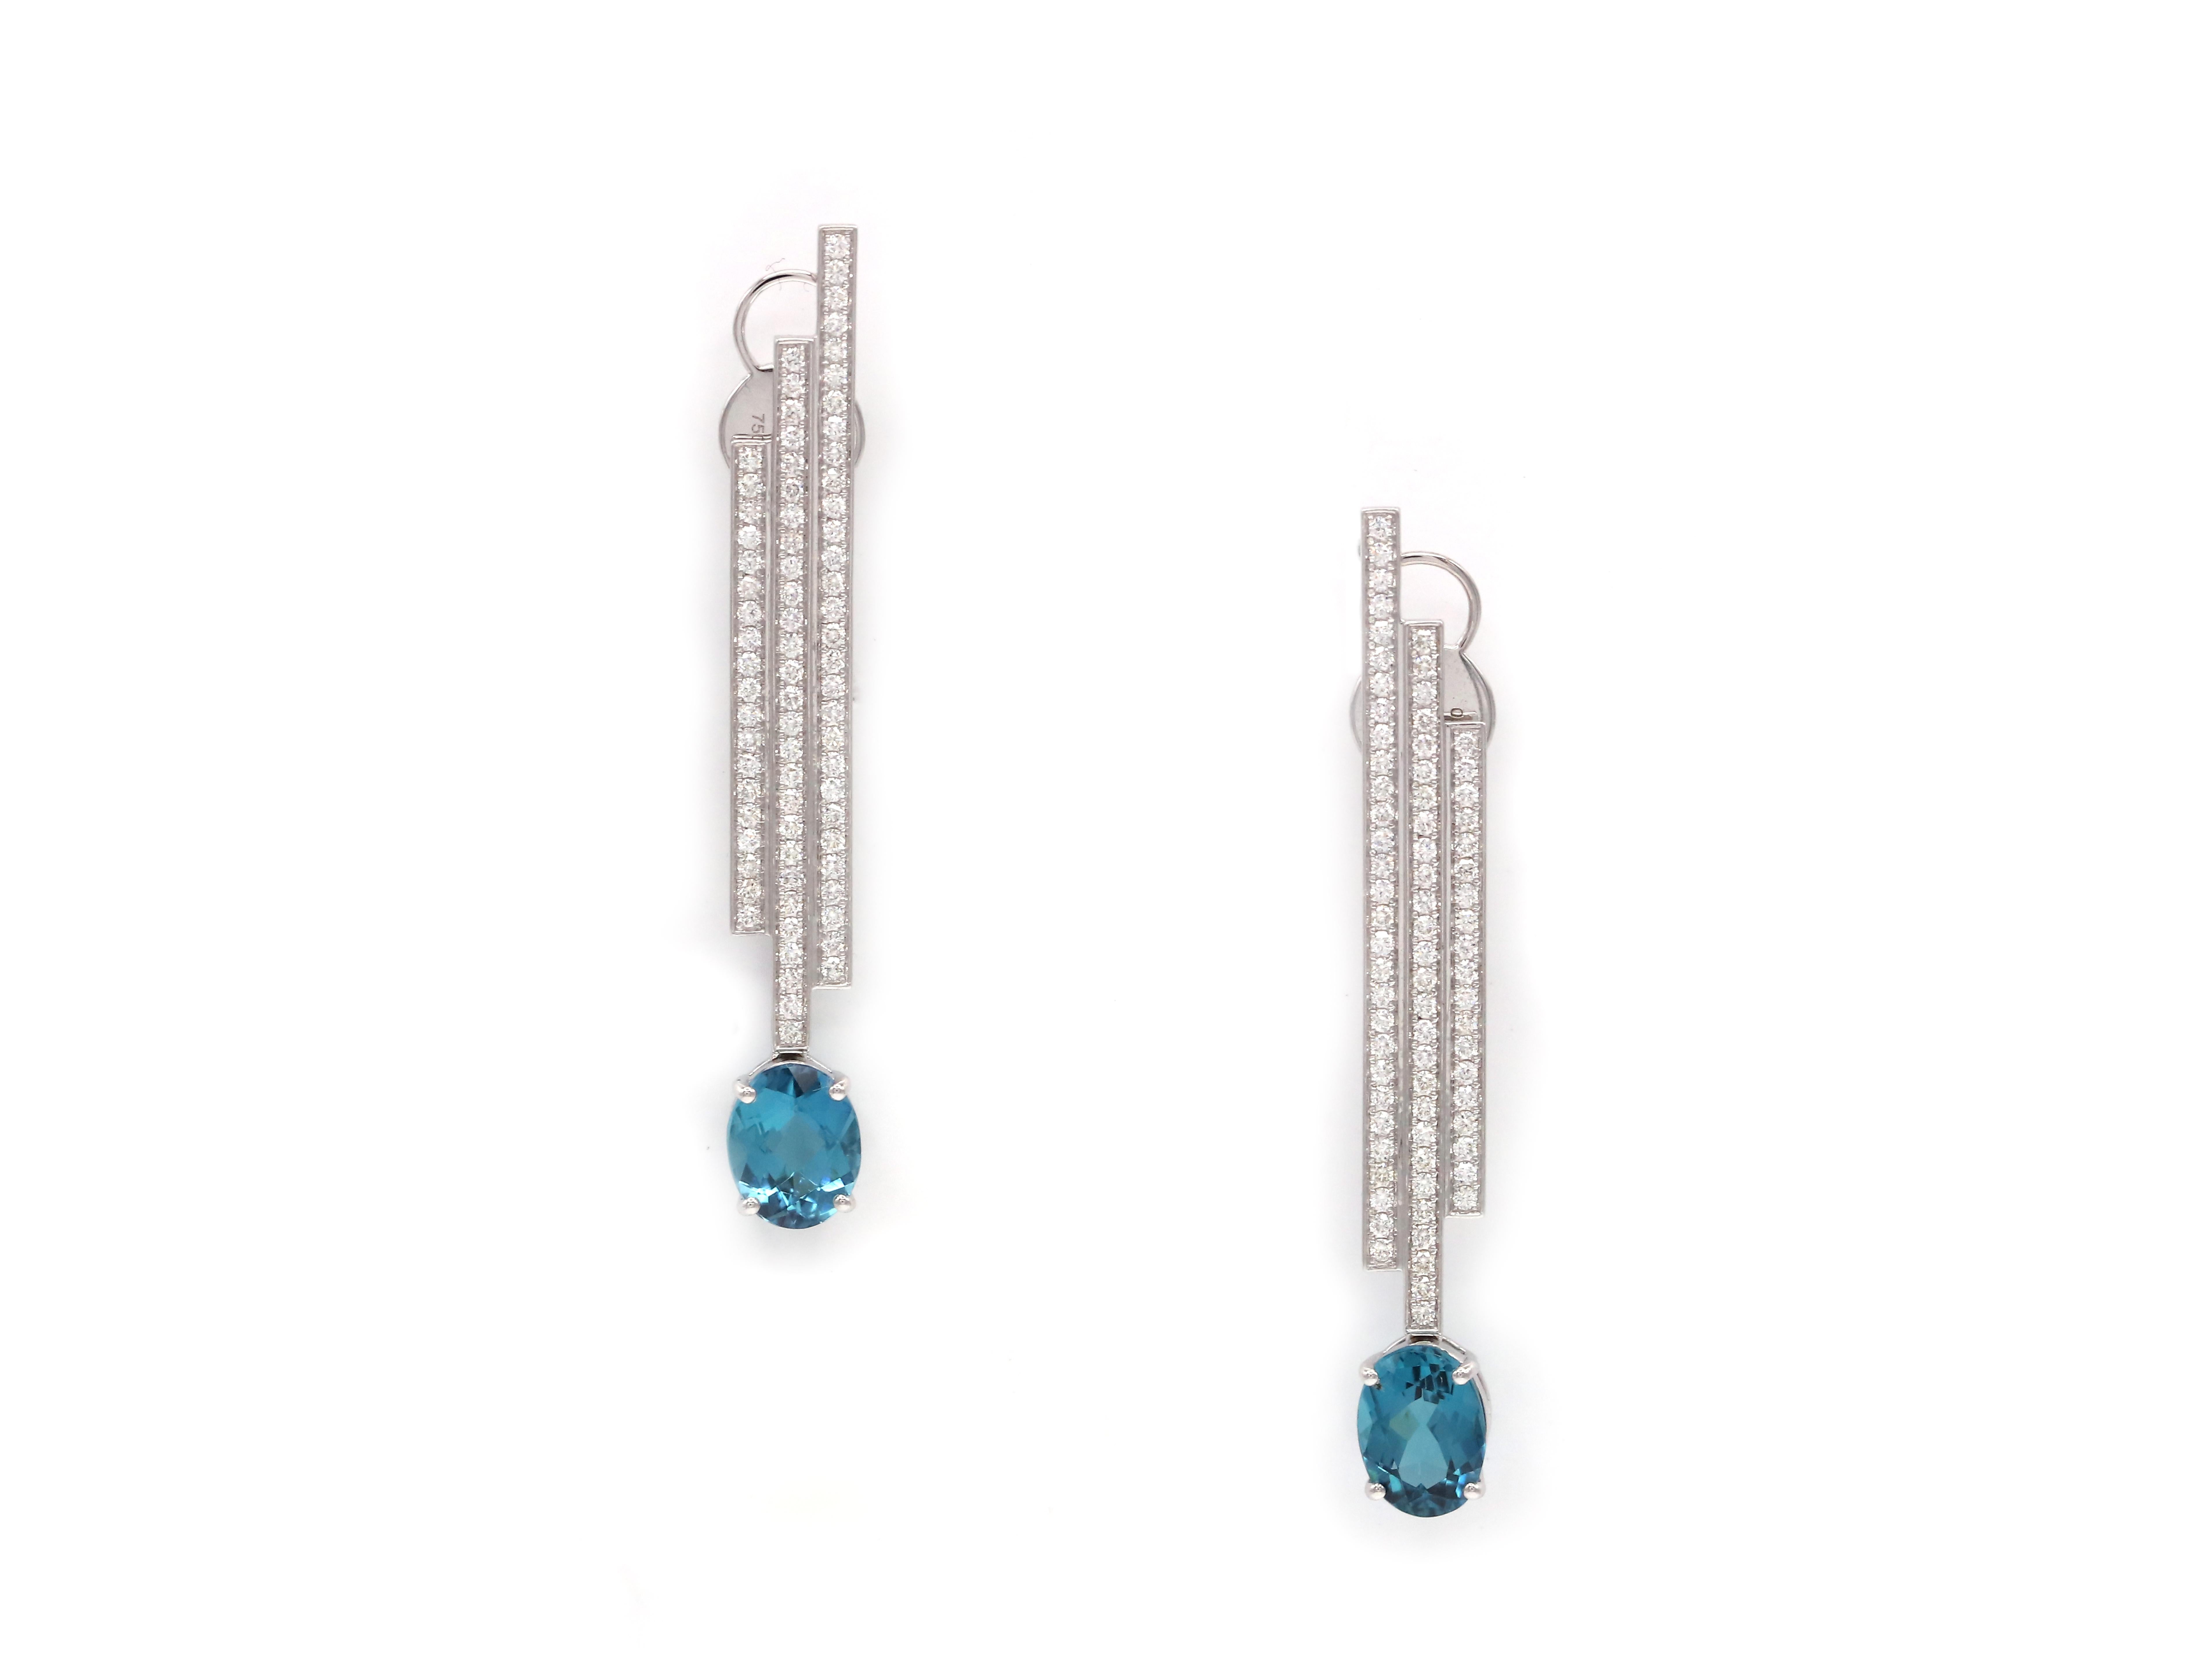 Earrings (Matching Ring Available)

18K White Gold 

Weight 7.12 GMS

Diamond-150/1.025 Cts

Tourmaline -2/3.35 Cts

Immerse yourself in the opulent style of the Art Deco era with these exquisite earrings, crafted from 7.12 grams of 18k white gold.